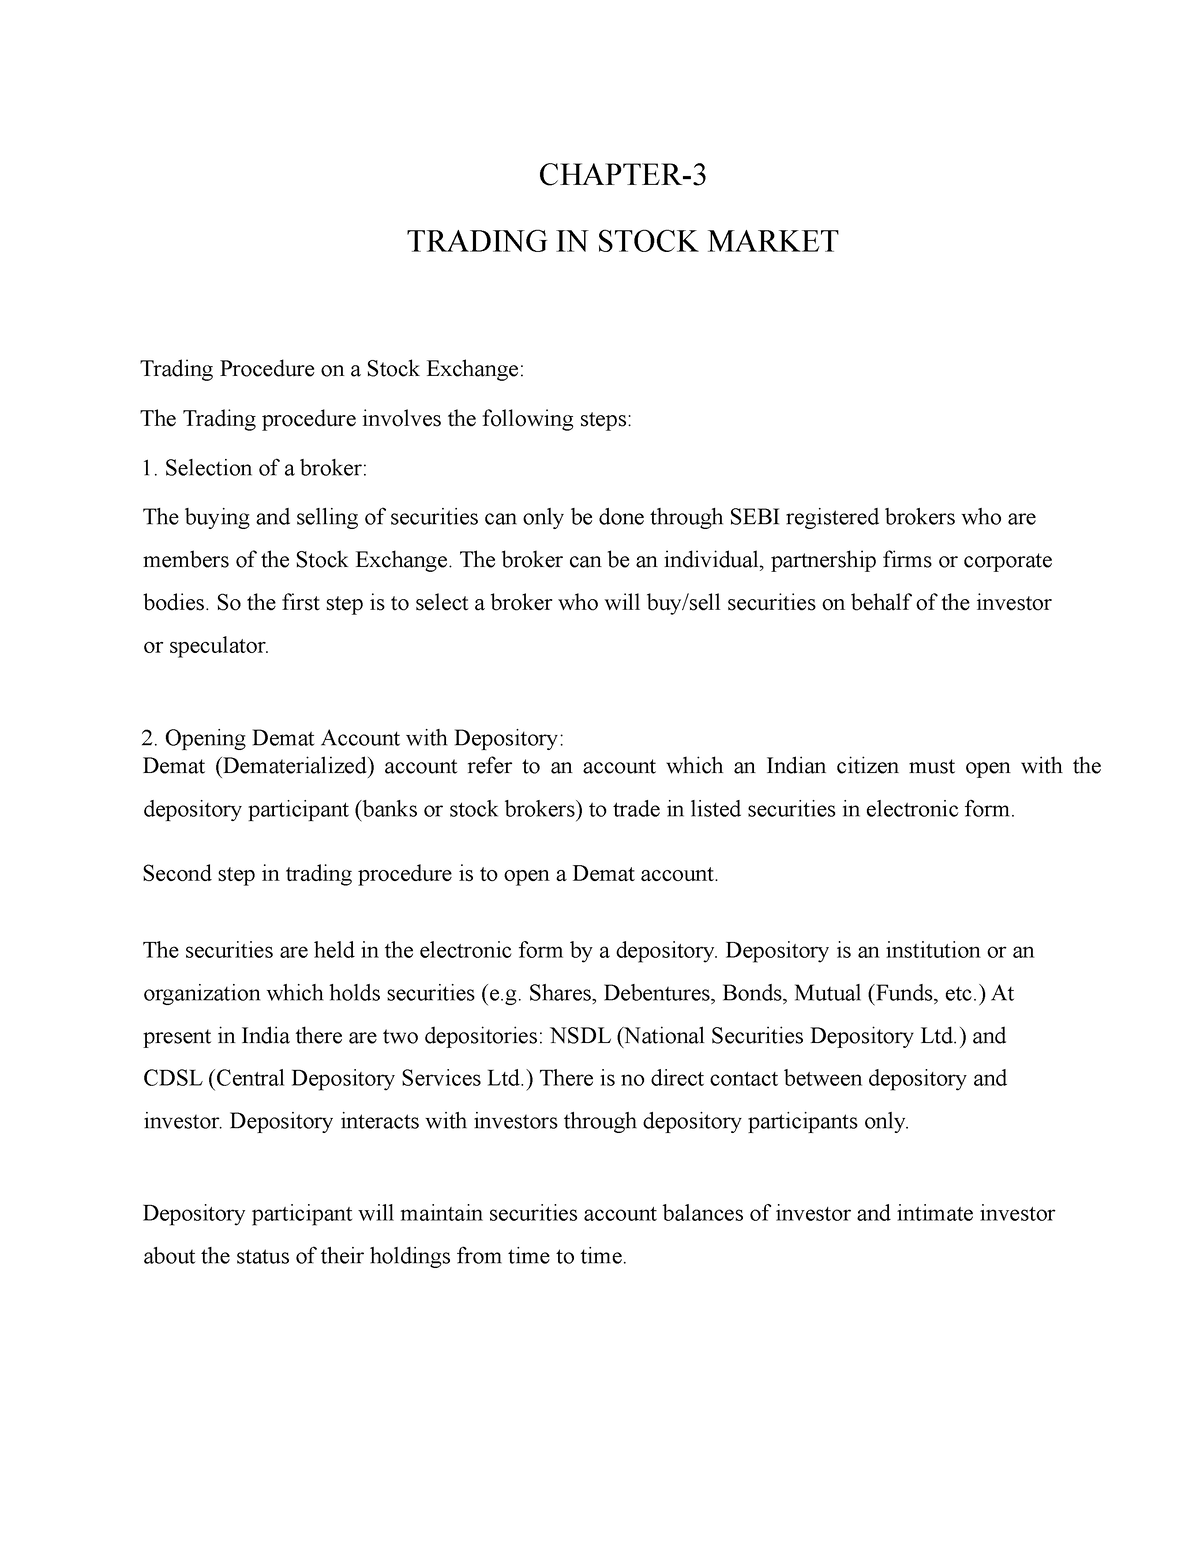 master thesis about stock market